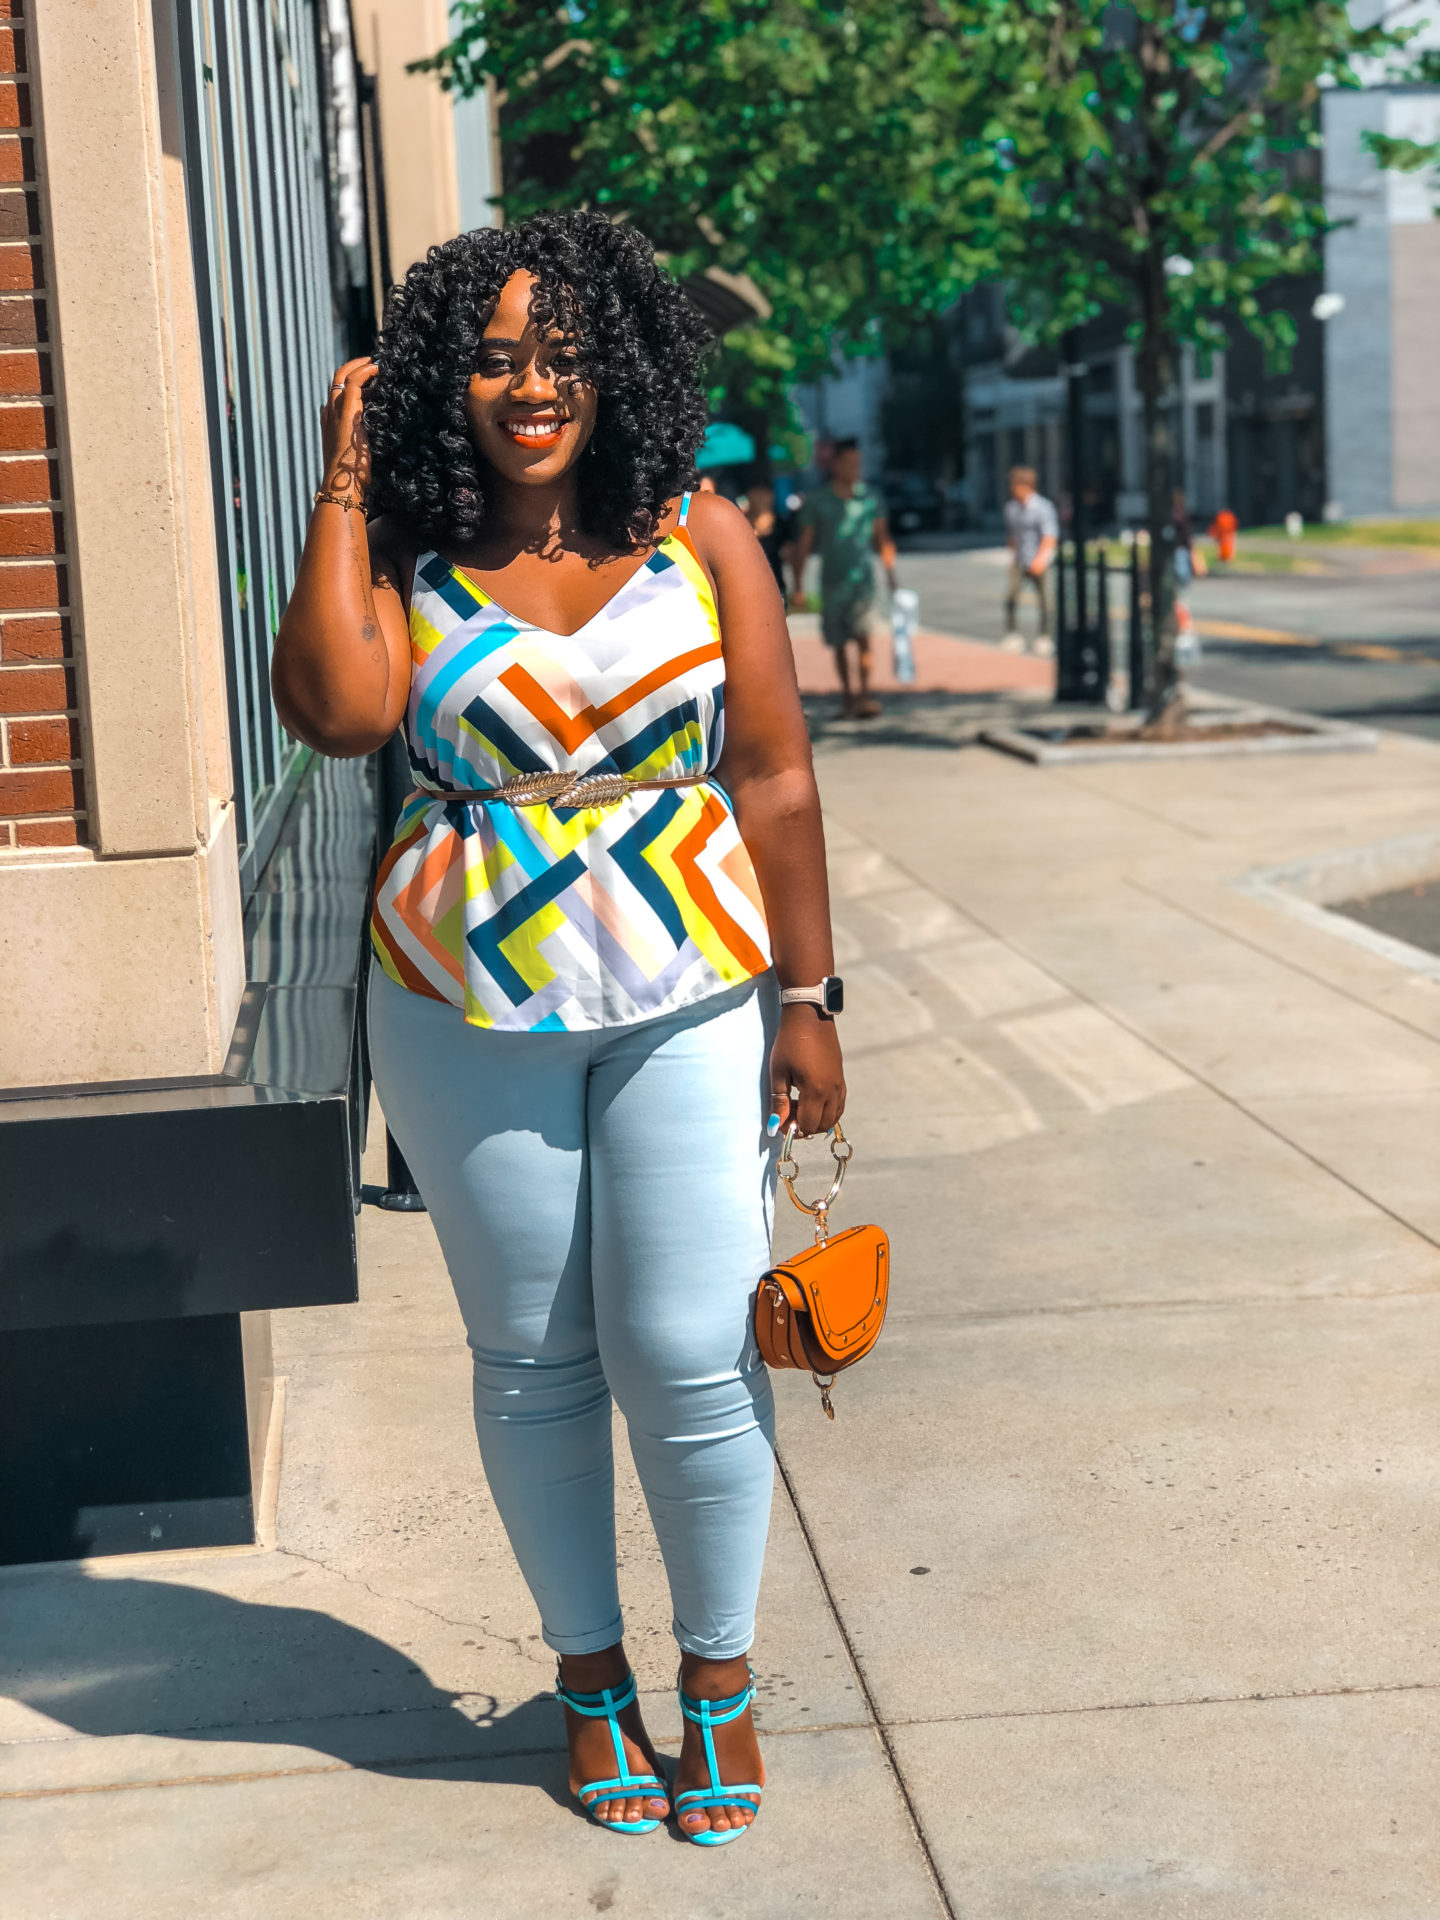 African, African Blogger, Boston Blogger, African Woman, African cocktail, Africancocktail, Forever 21, Curvy Woman, Curvy Blogger, Curvy Girl